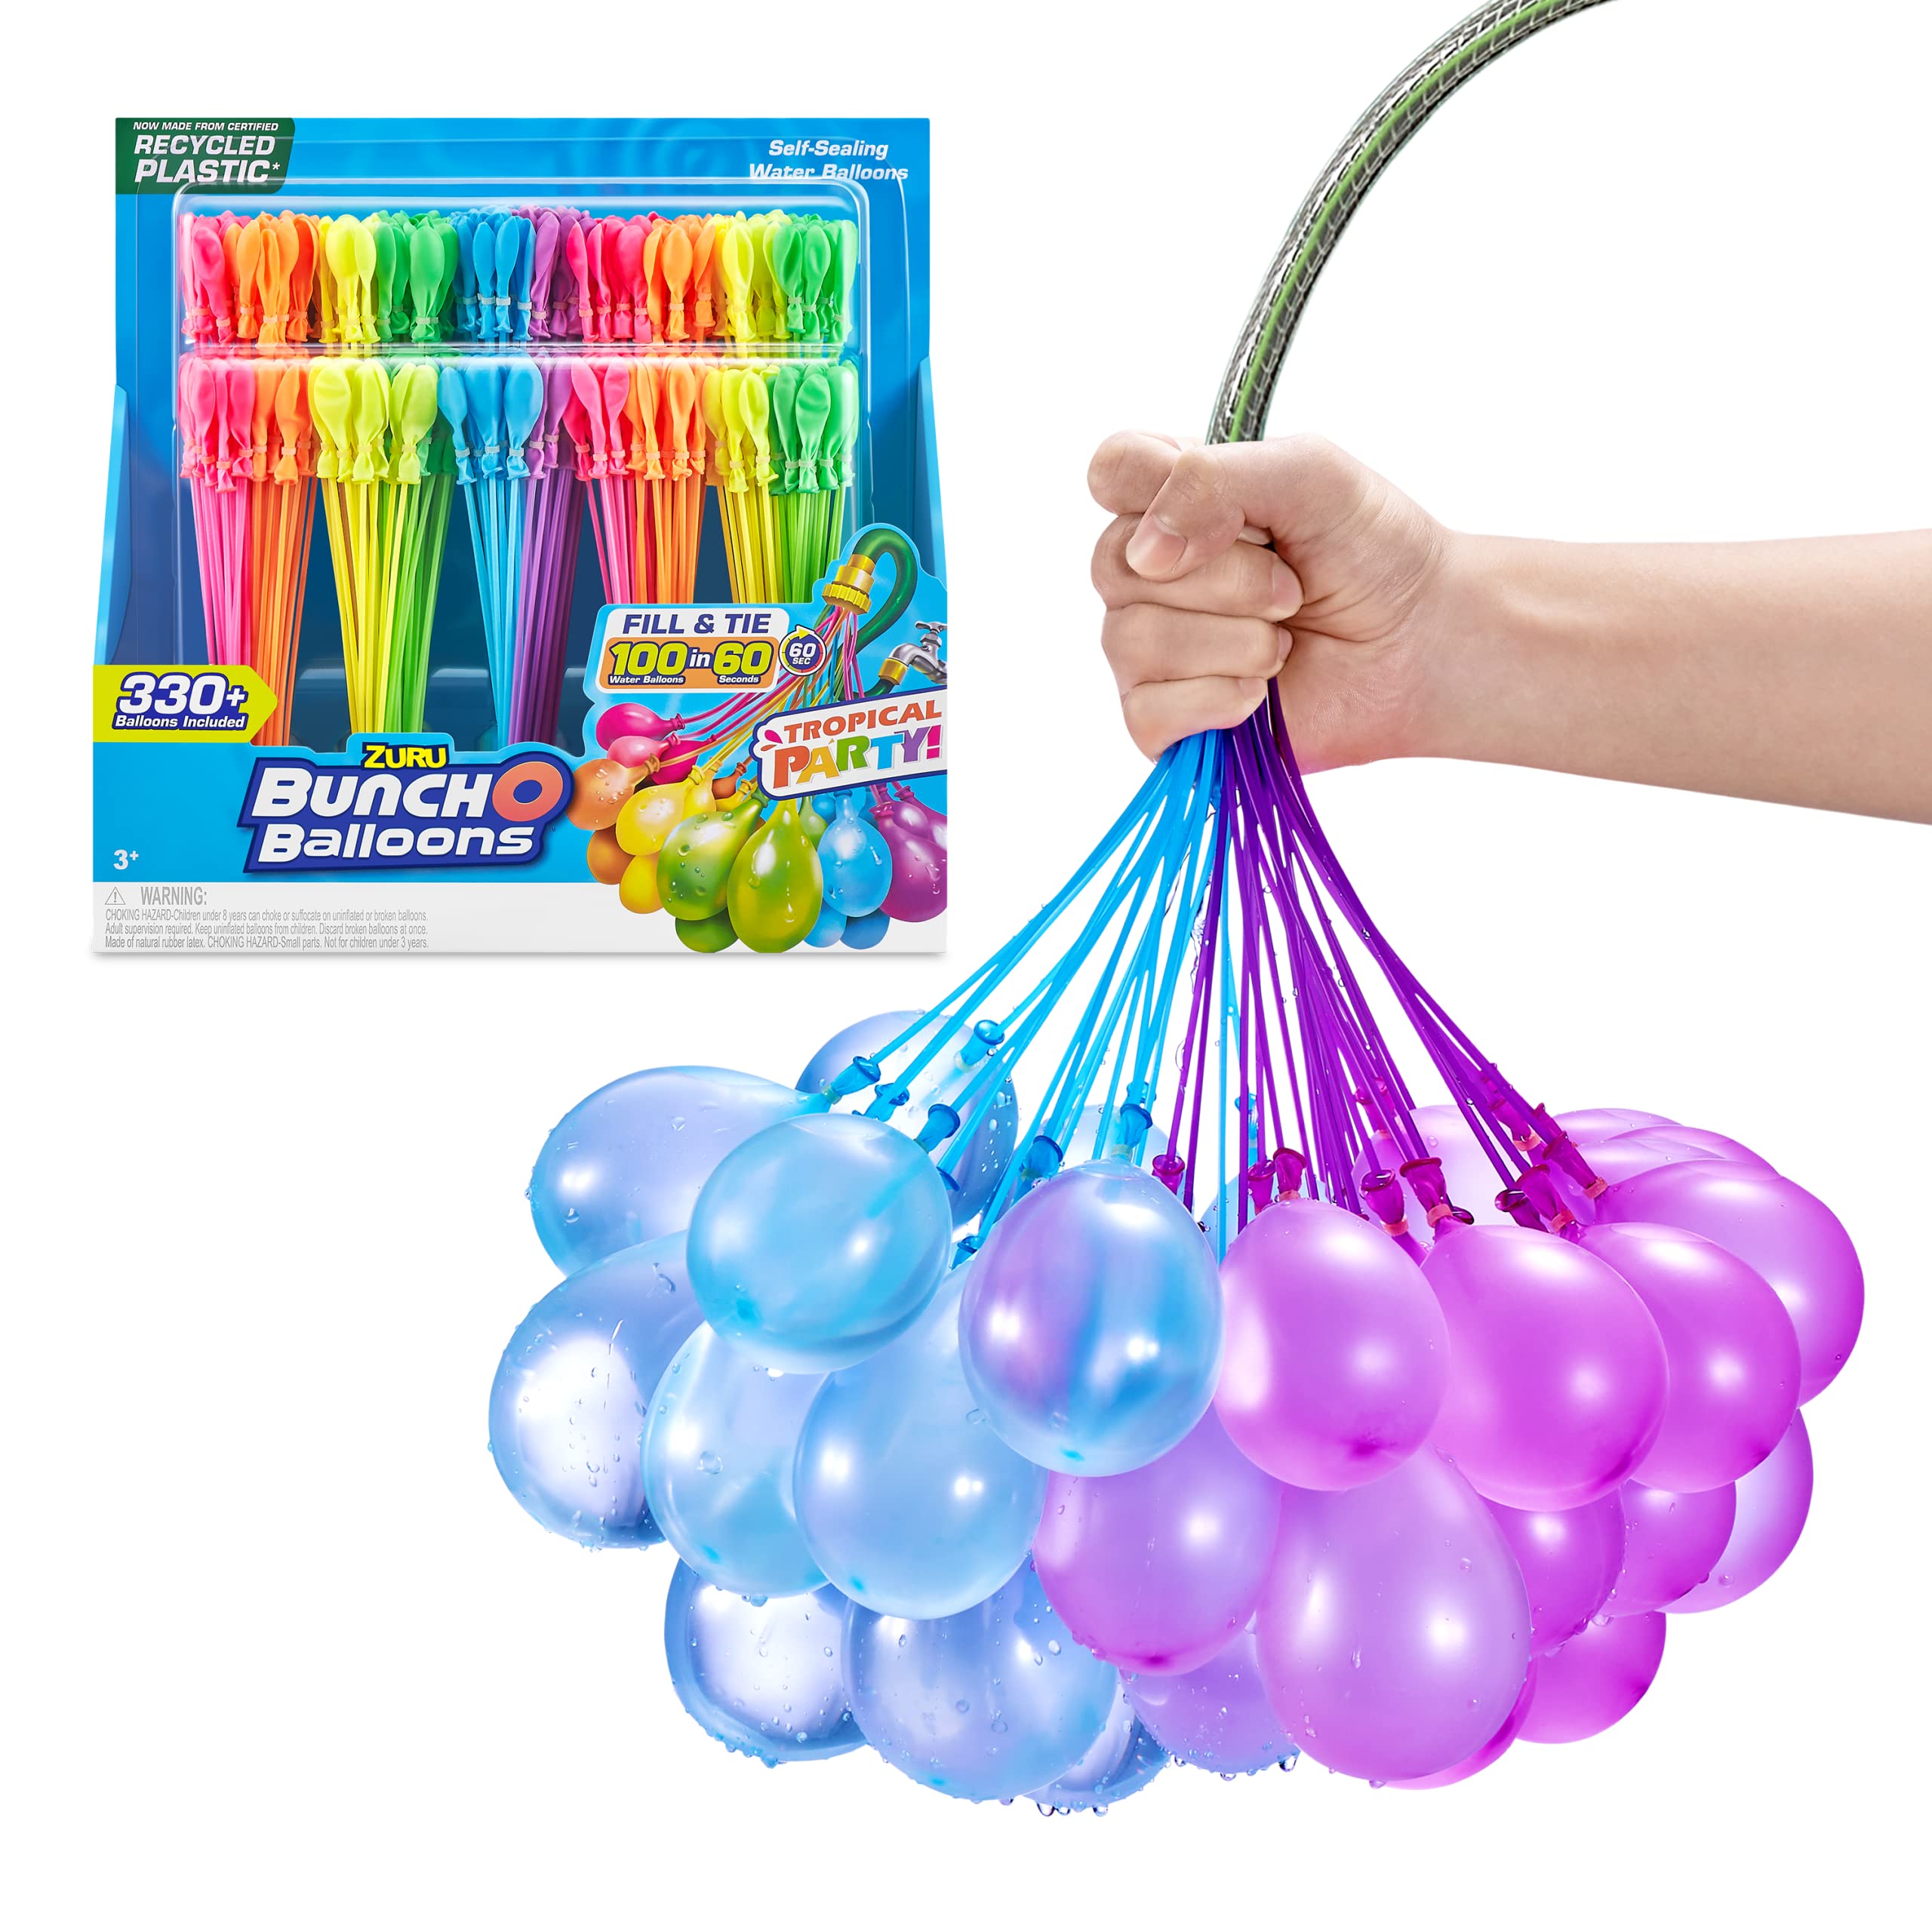 Original Bunch O Balloons Tropical Party 330+ Rapid-Filling Self-Sealing Water Balloons (Amazon Exclusive 10 Pack) by ZURU Water Balloon for the Whole Family, Kids, Teens and Adults